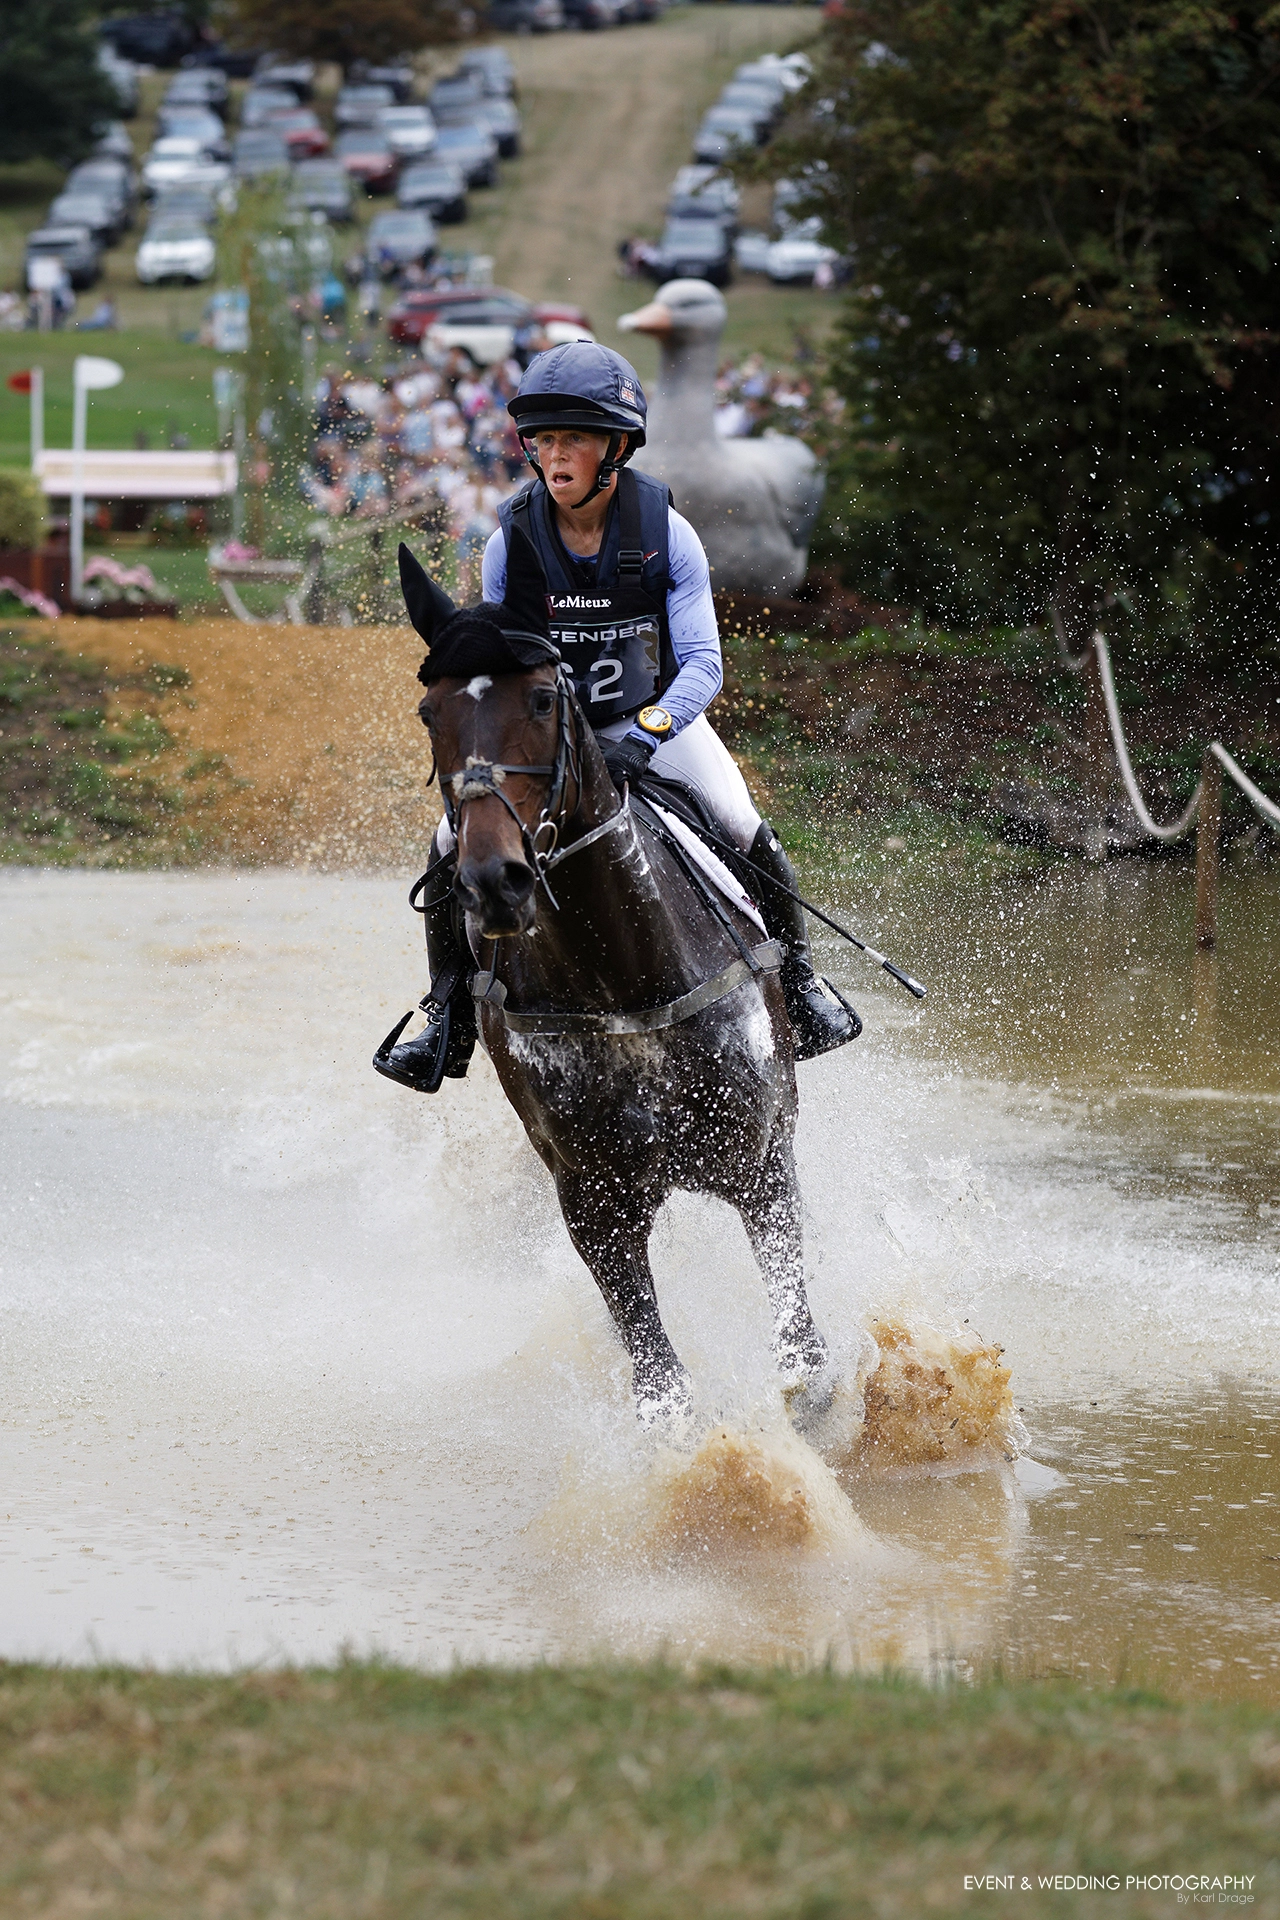 Ros Canter & Pencos Crown Jewel take on the Boodles Raindance at the 2022 Land Rover Burghley Horse Trials.